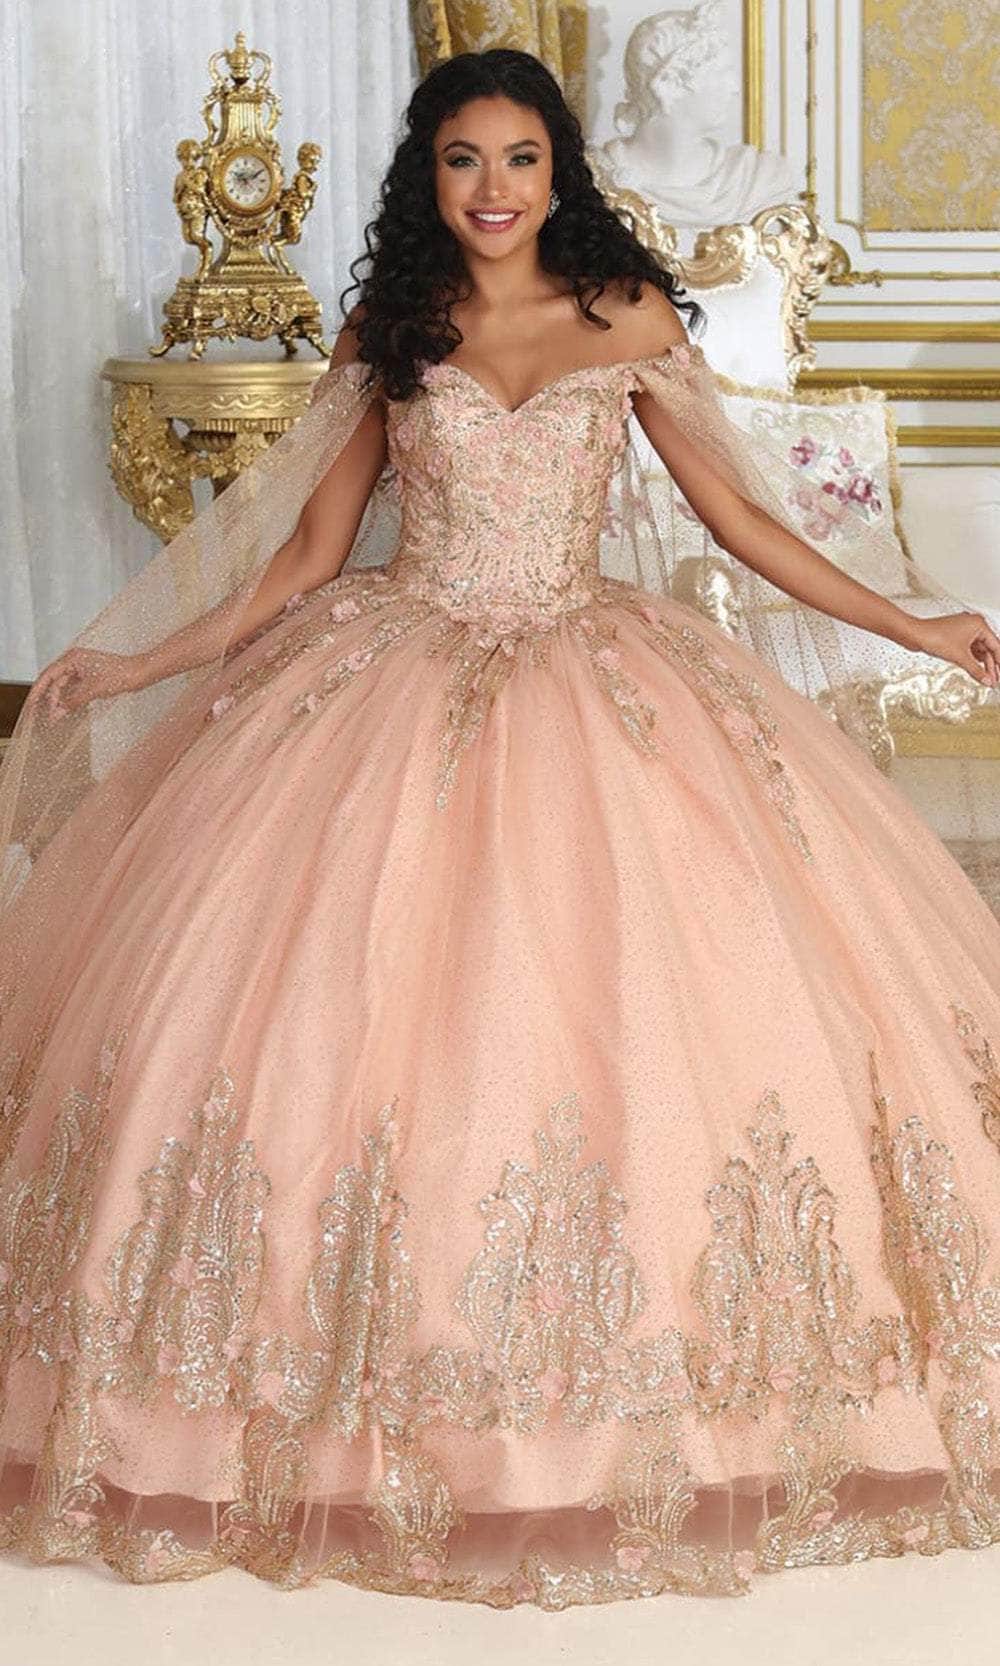 Image of May Queen LK211 - Cape Sleeves Glitter Ballgown